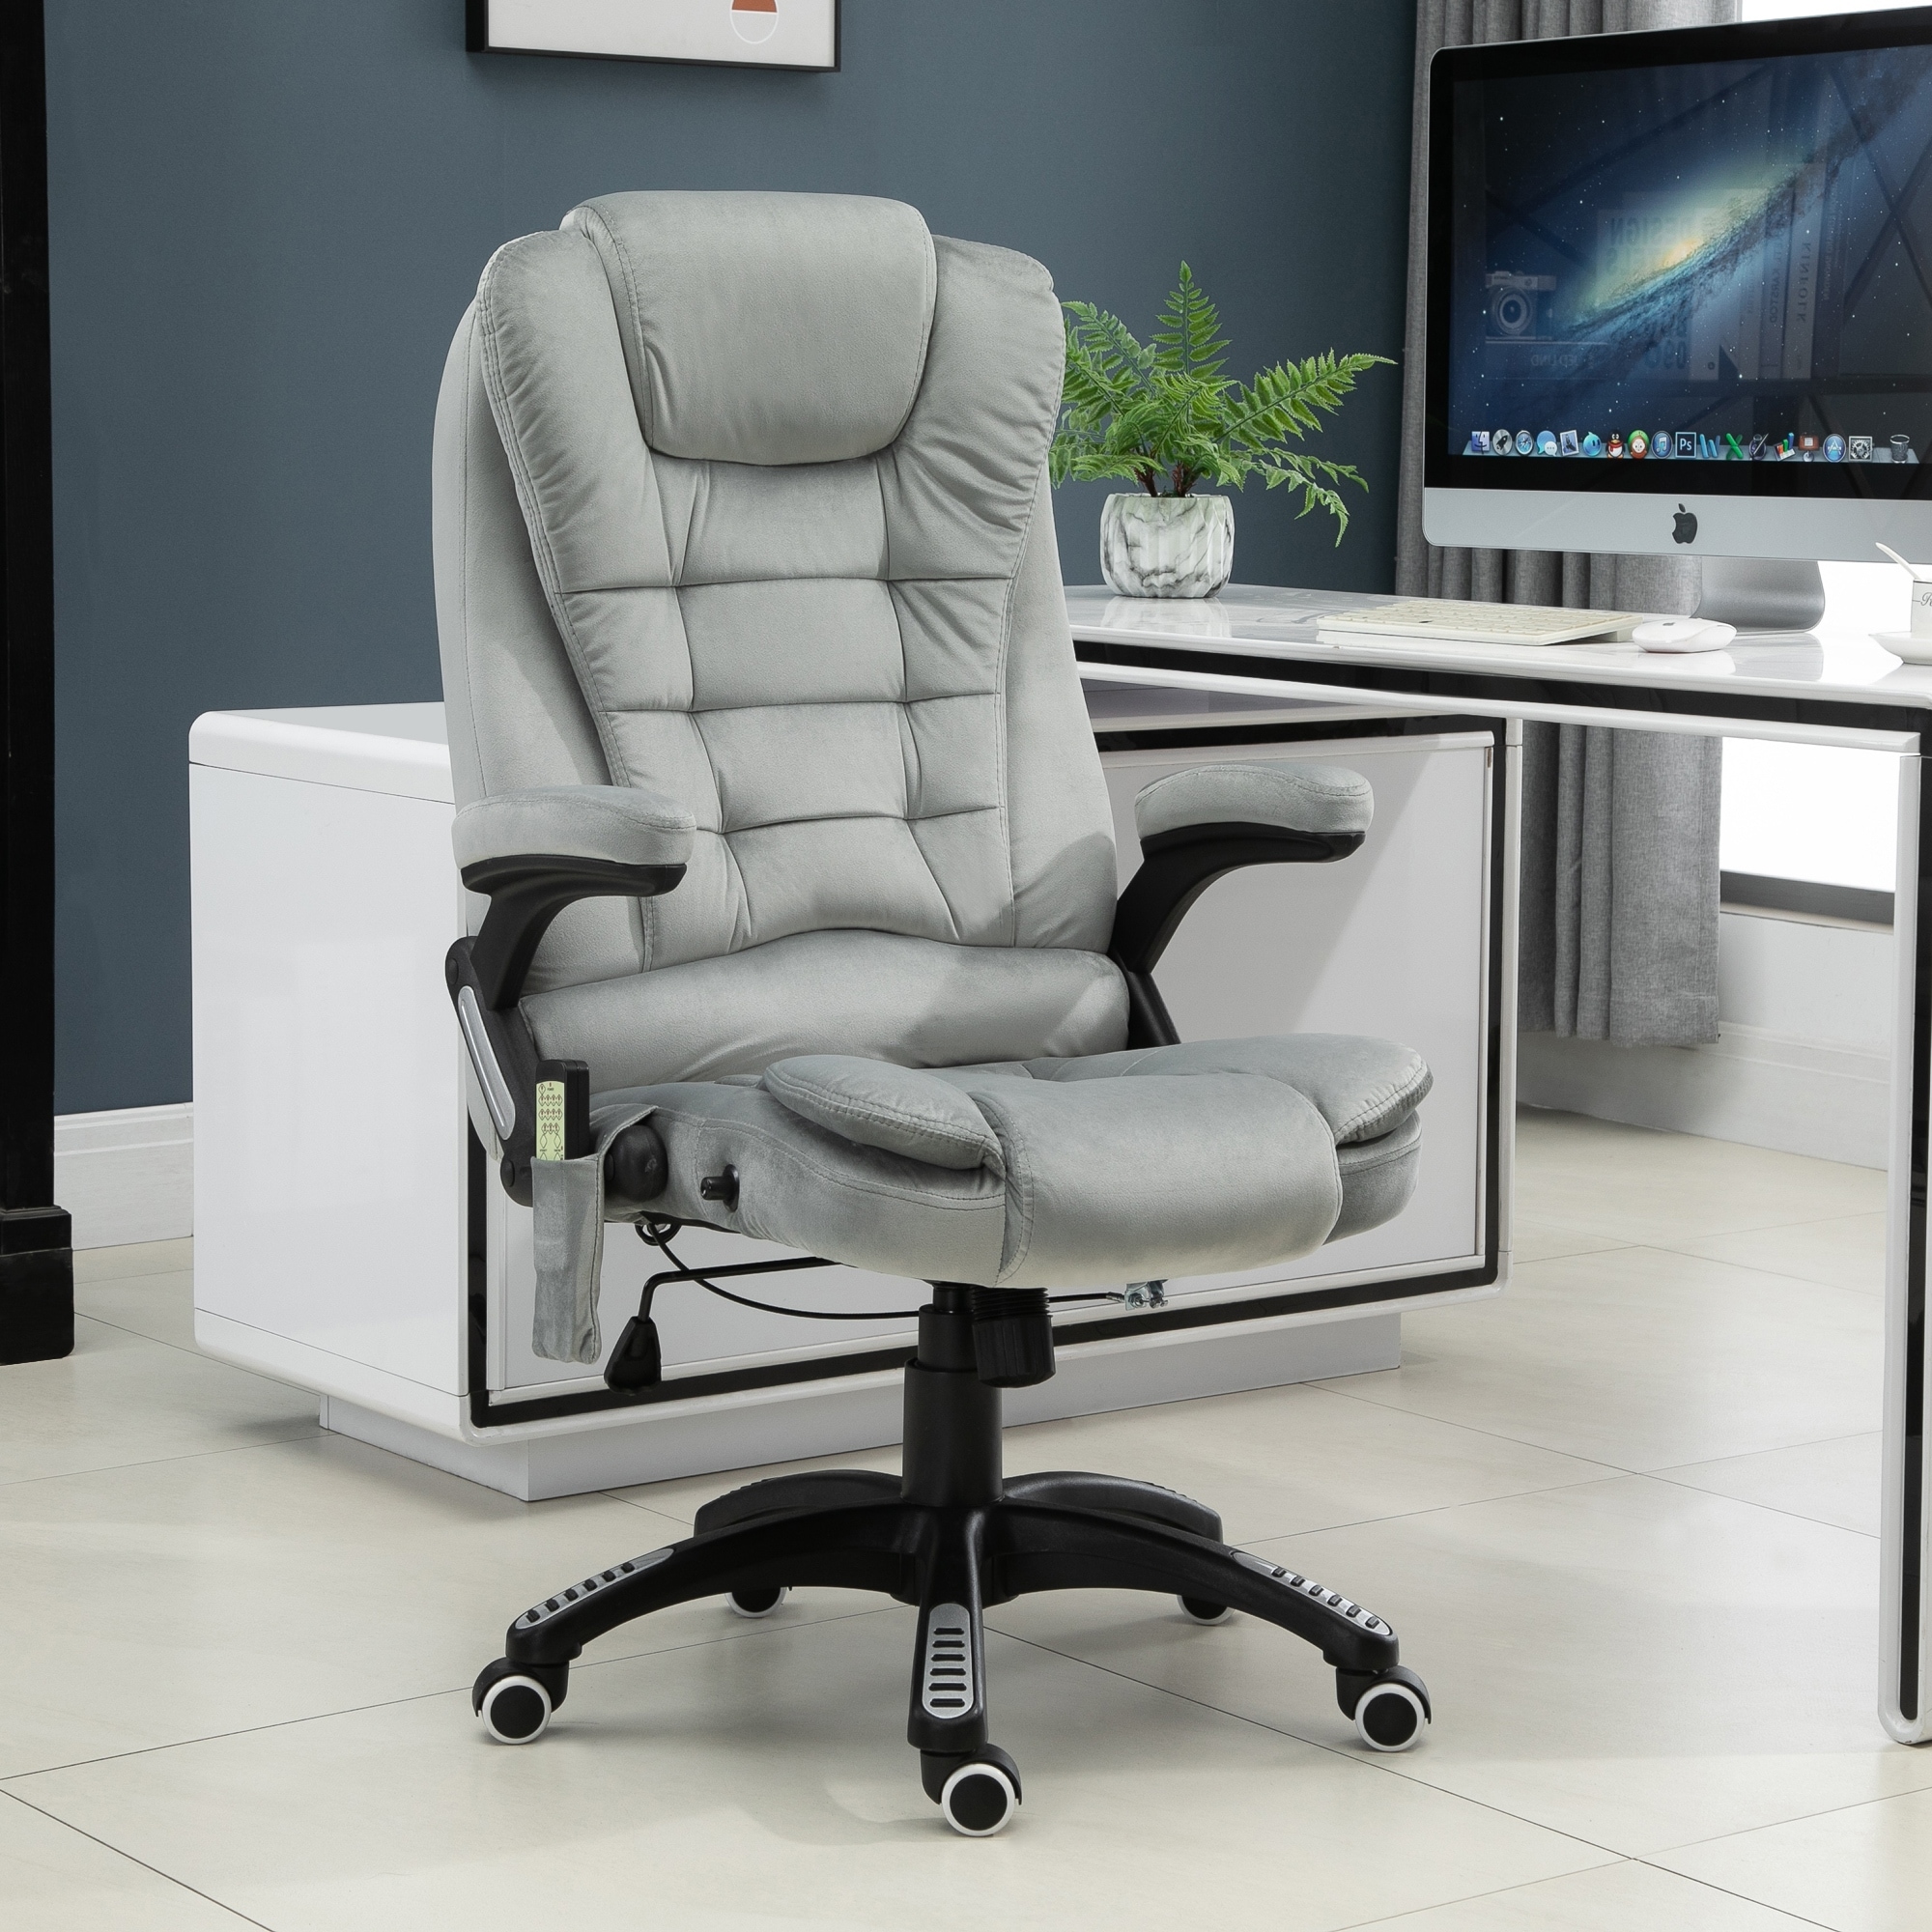 Ergonomic High Back Executive Computer Office Desk Chair Dining Seat No Wheels 